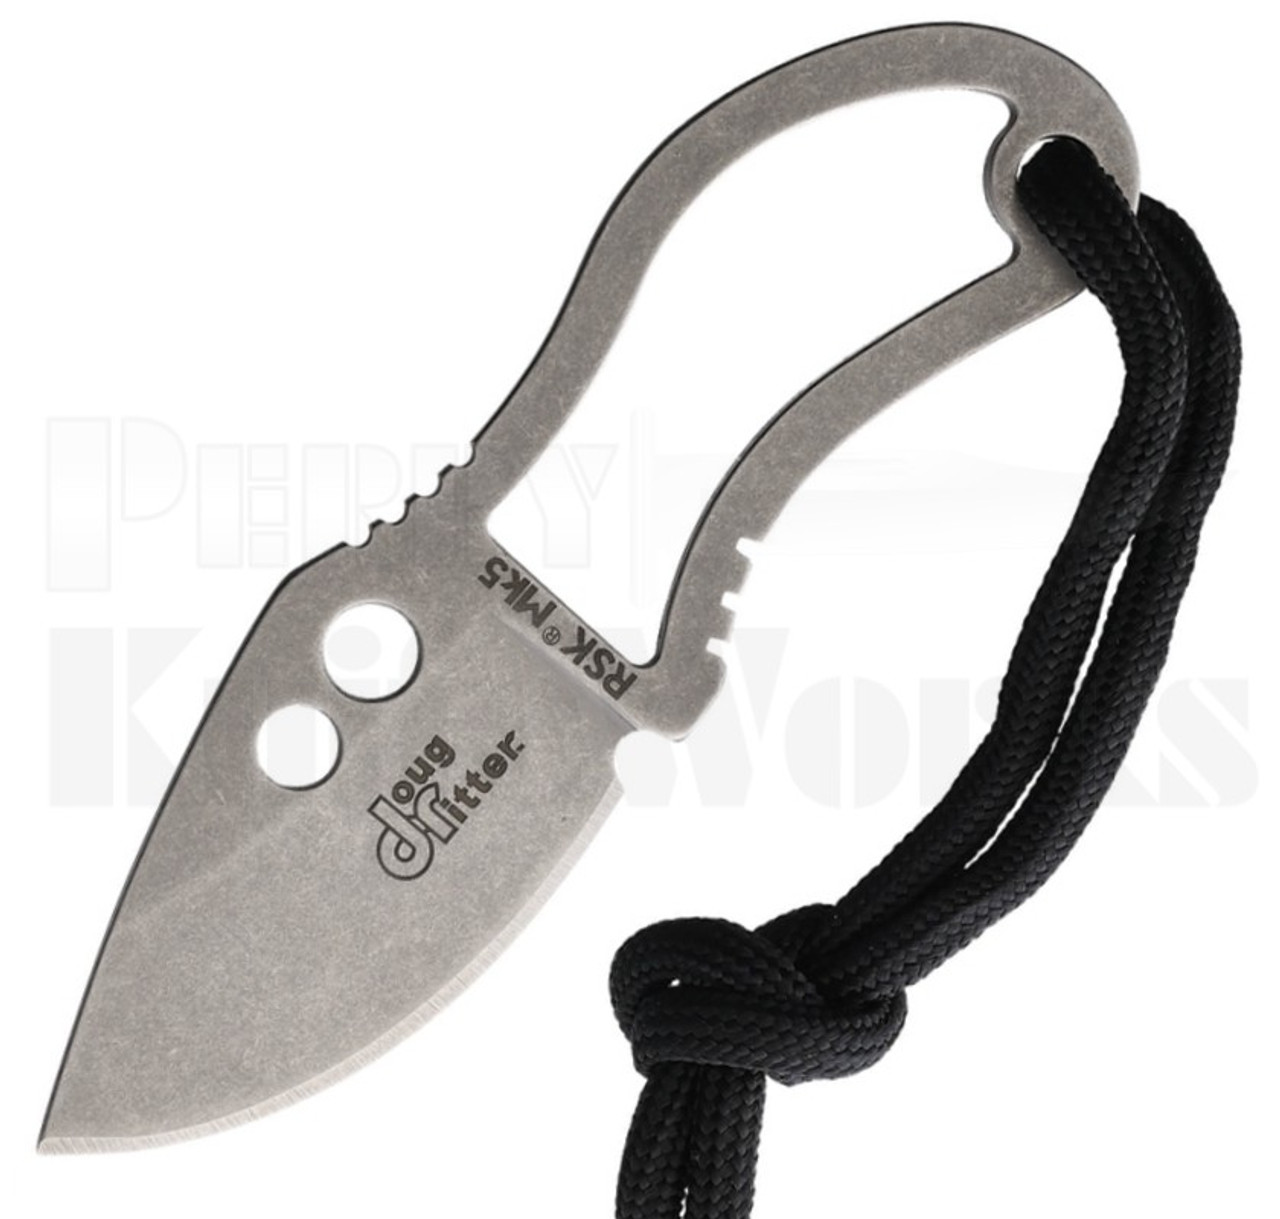 Doug Ritter RSK Mk5 Survival Fixed Blade Knife Stonewash l For Sale